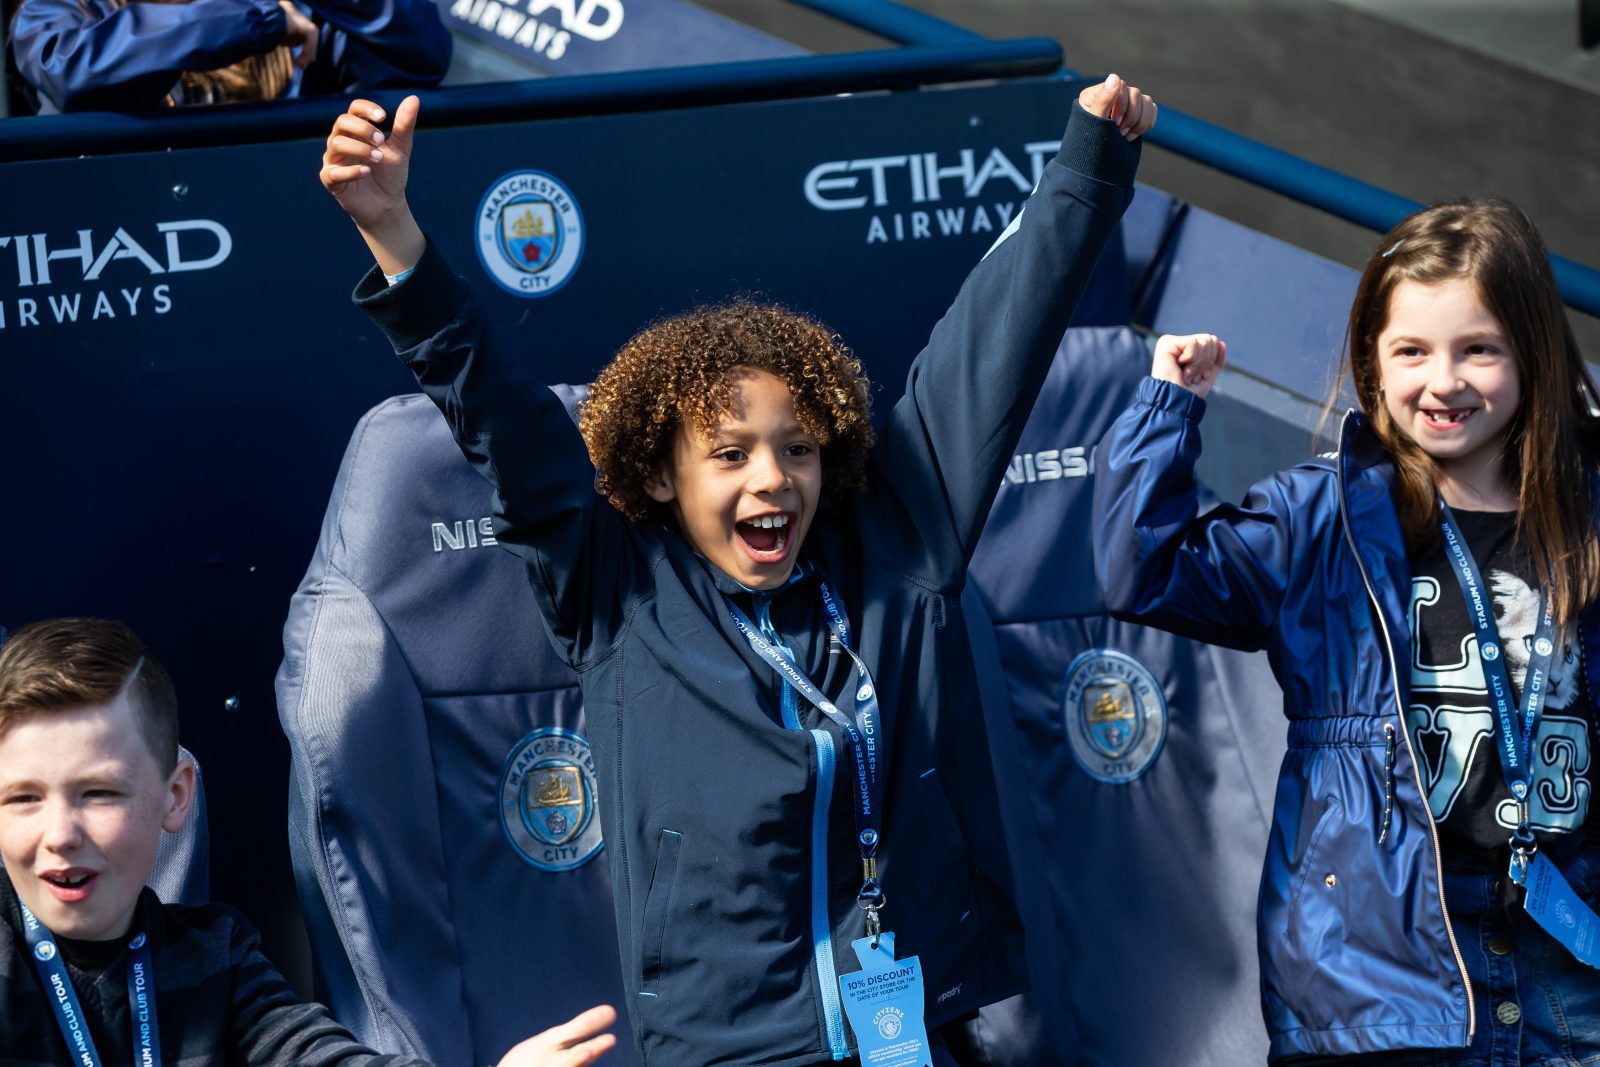 You can go on an Easter egg hunt tour of Manchester City&#8217;s stadium this half term, The Manc